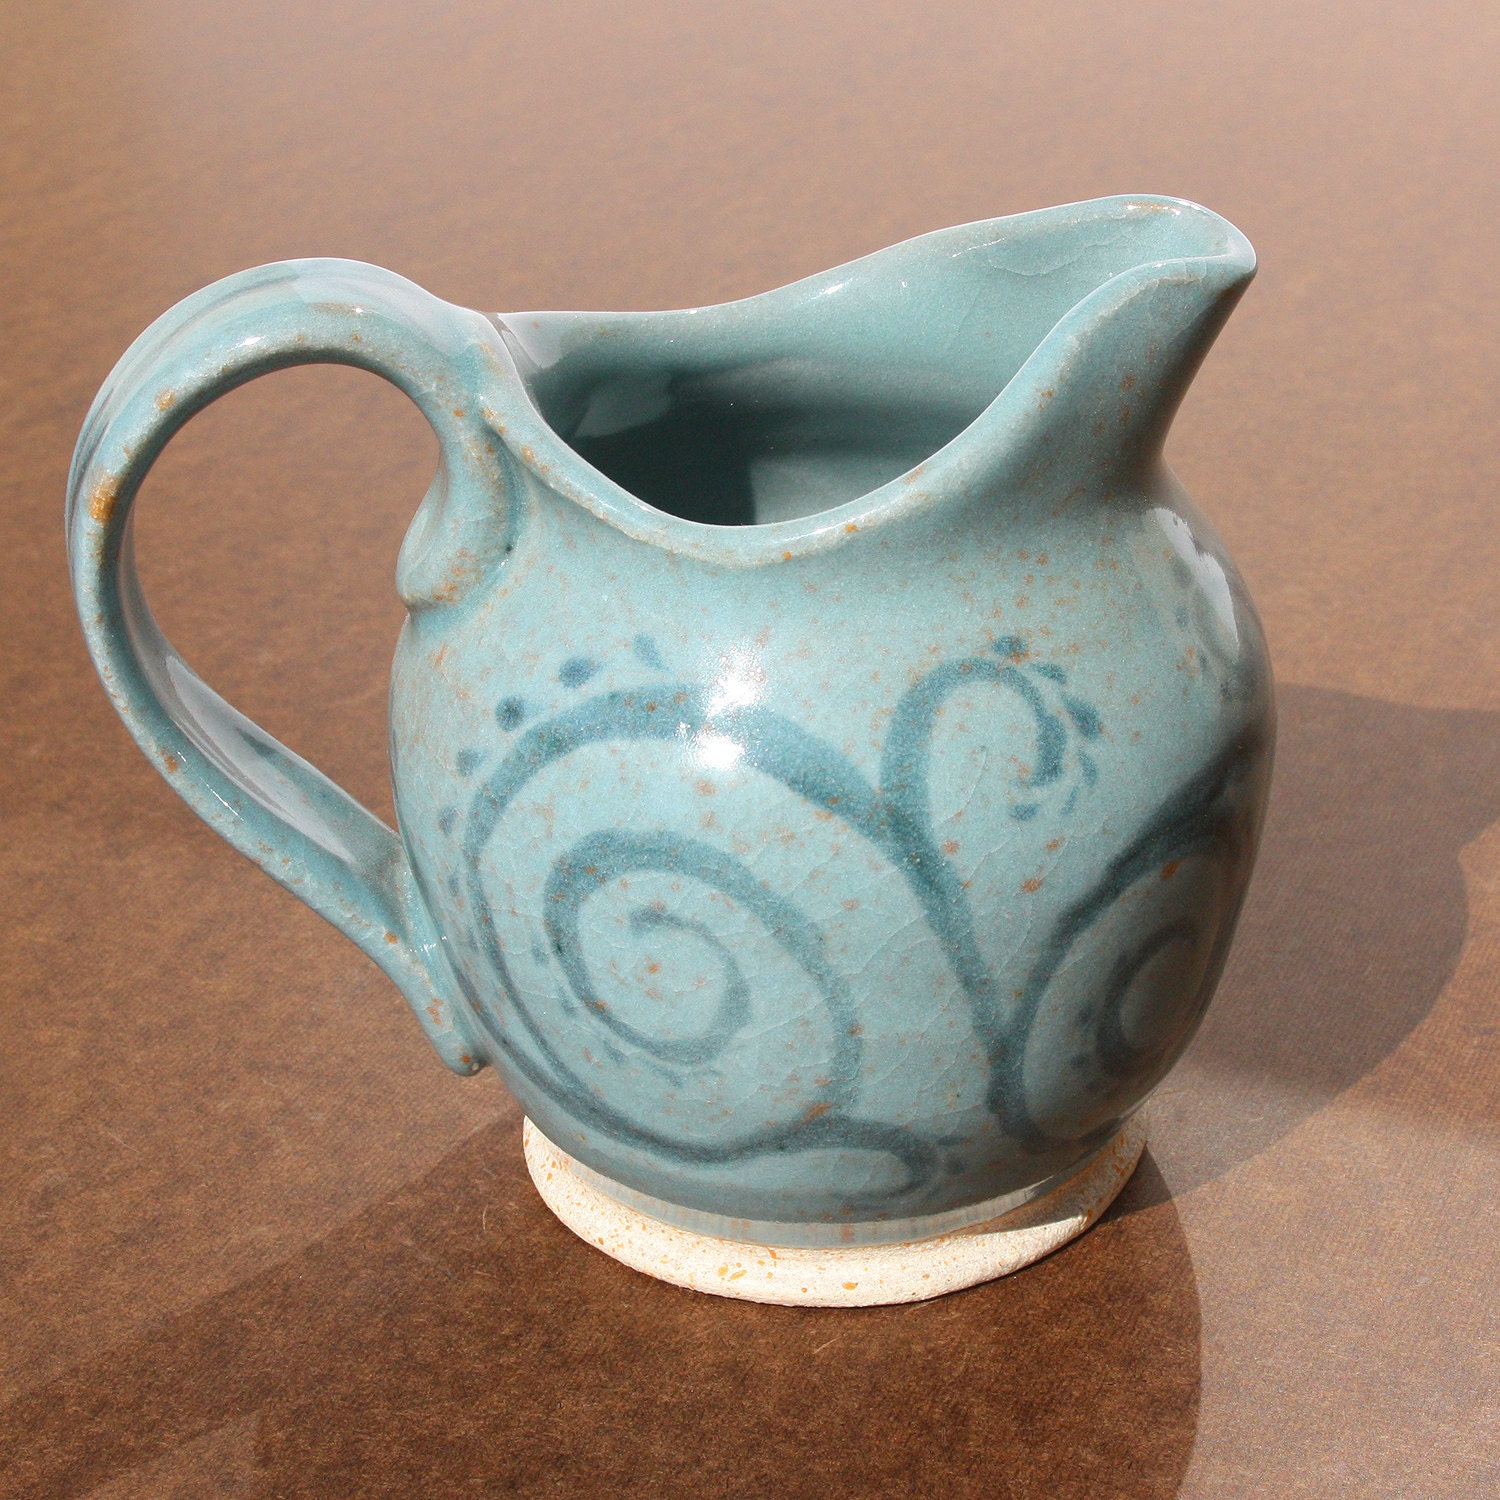 Scrolly Creamer (approx. 6" tall) - SincerePottery